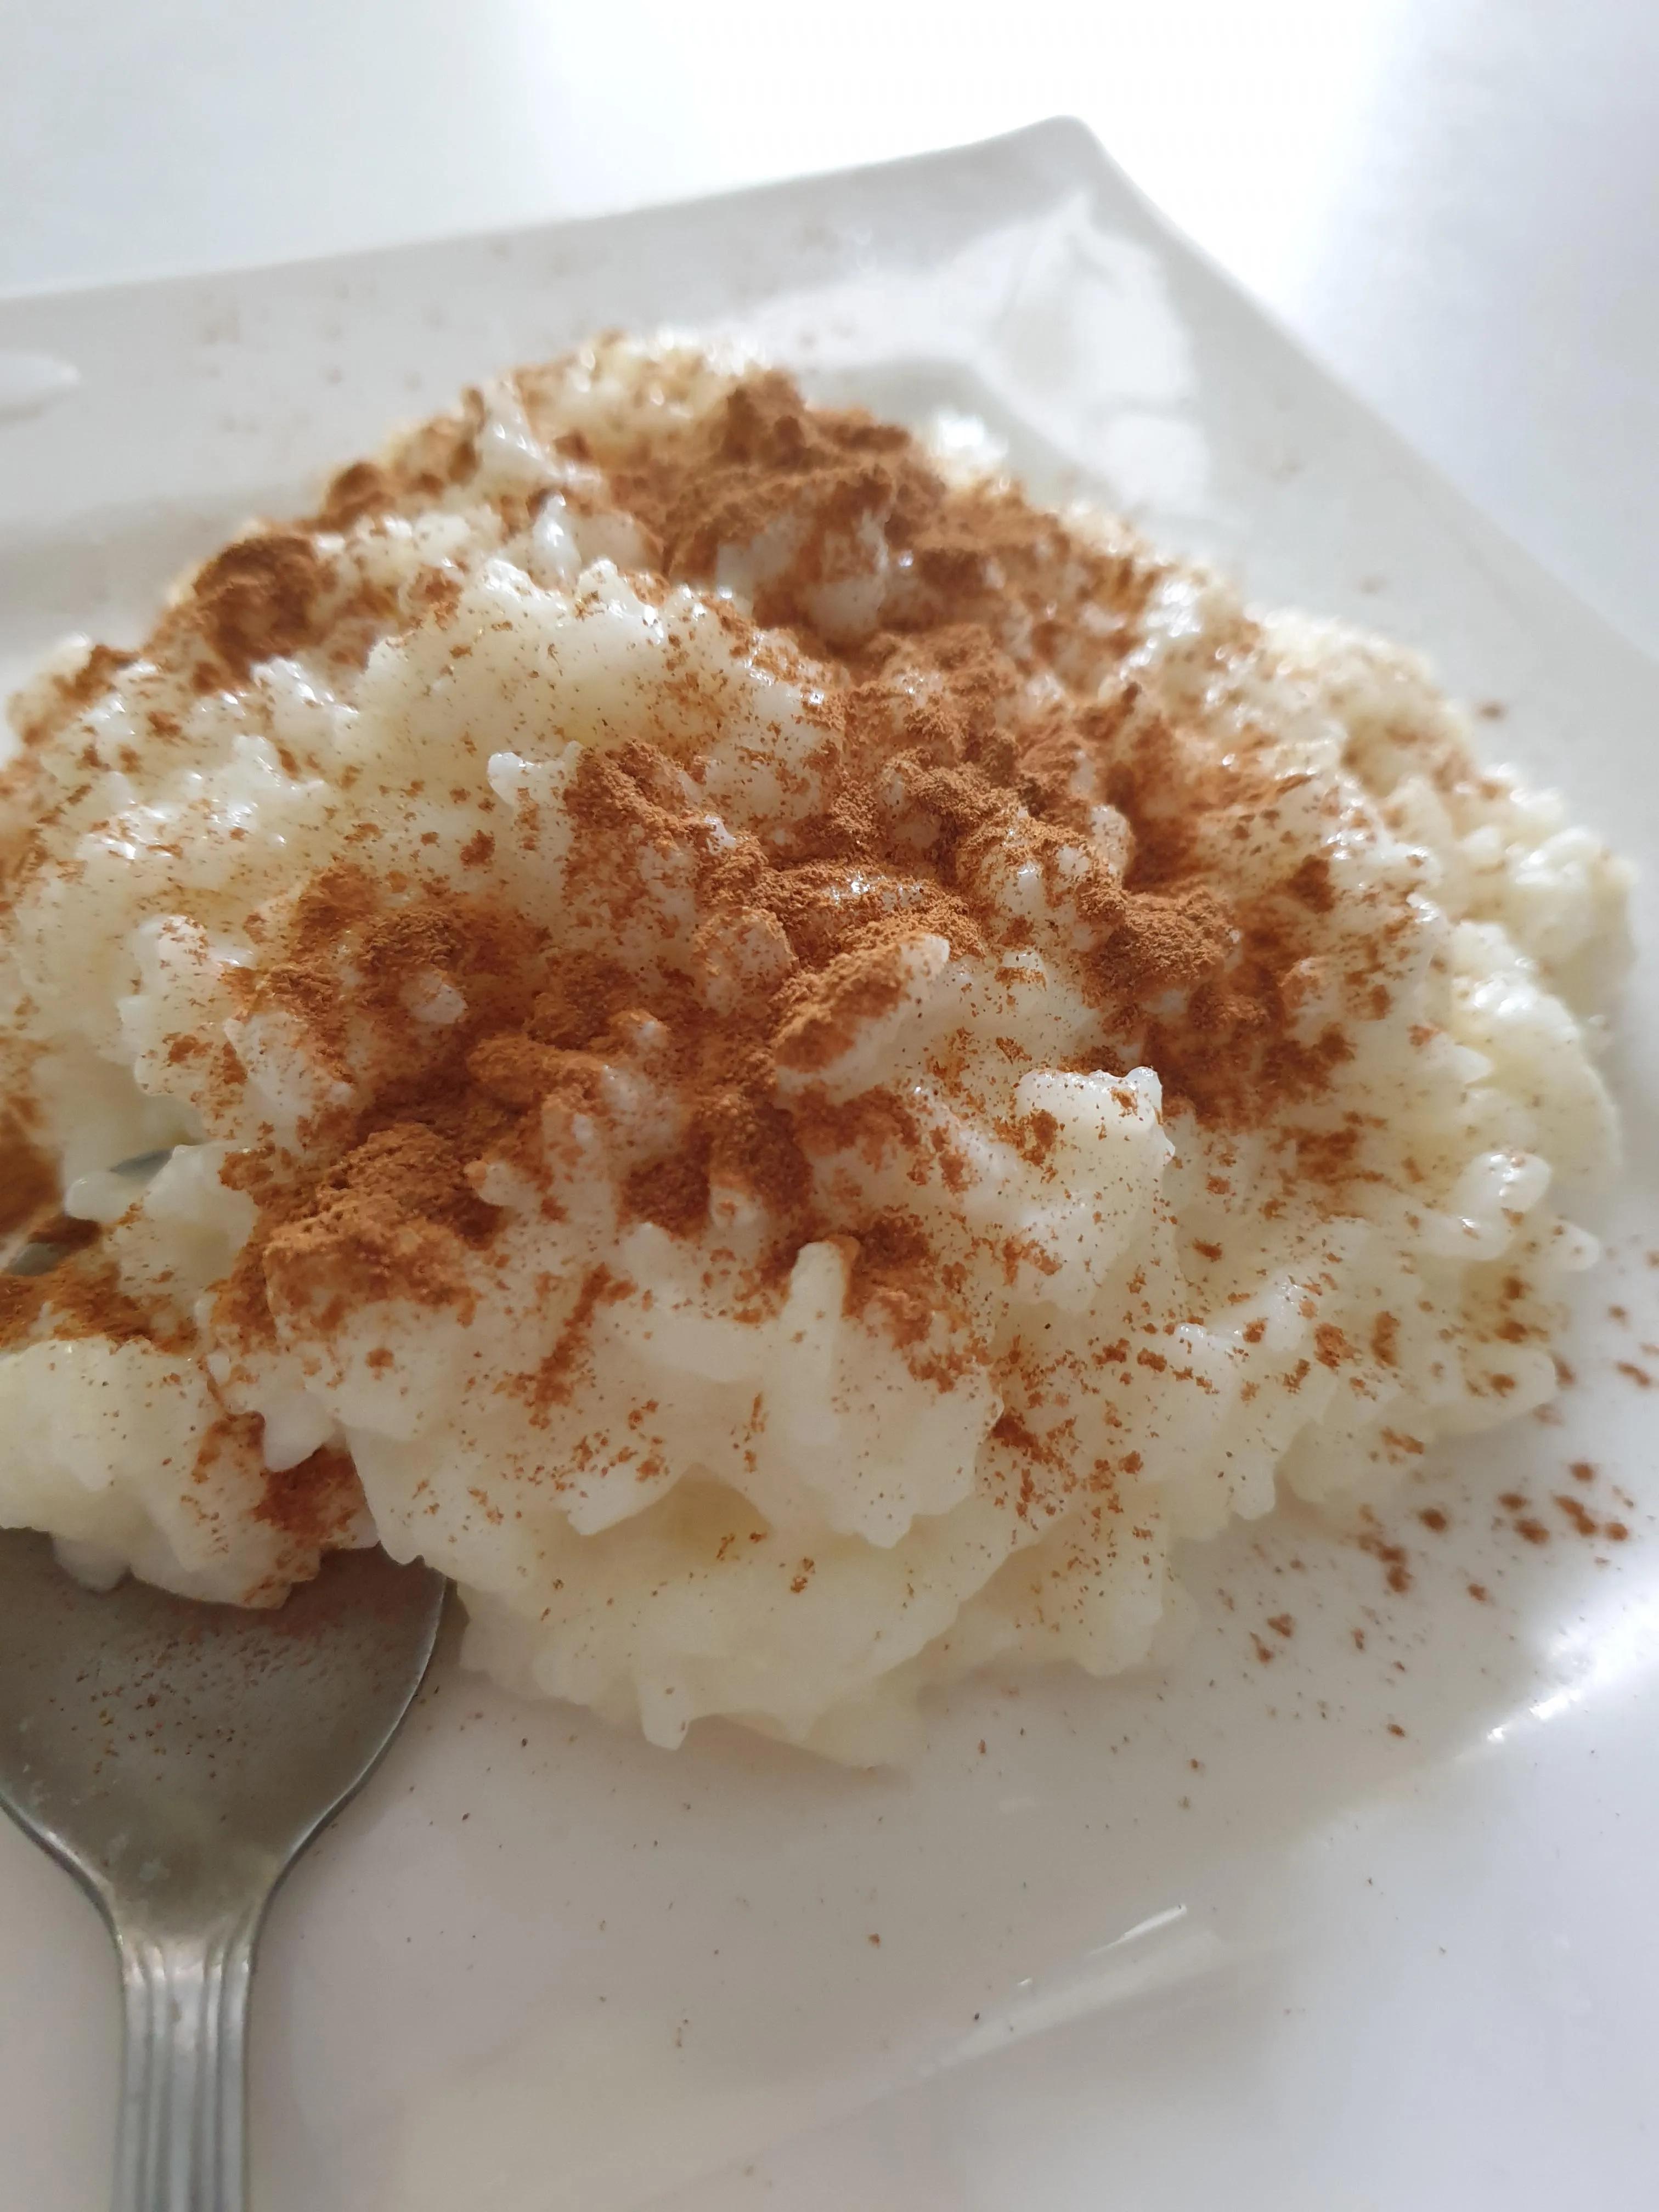 Milchreis (rice cooked in milk) with Cinnamon. A dessert in Germany ...